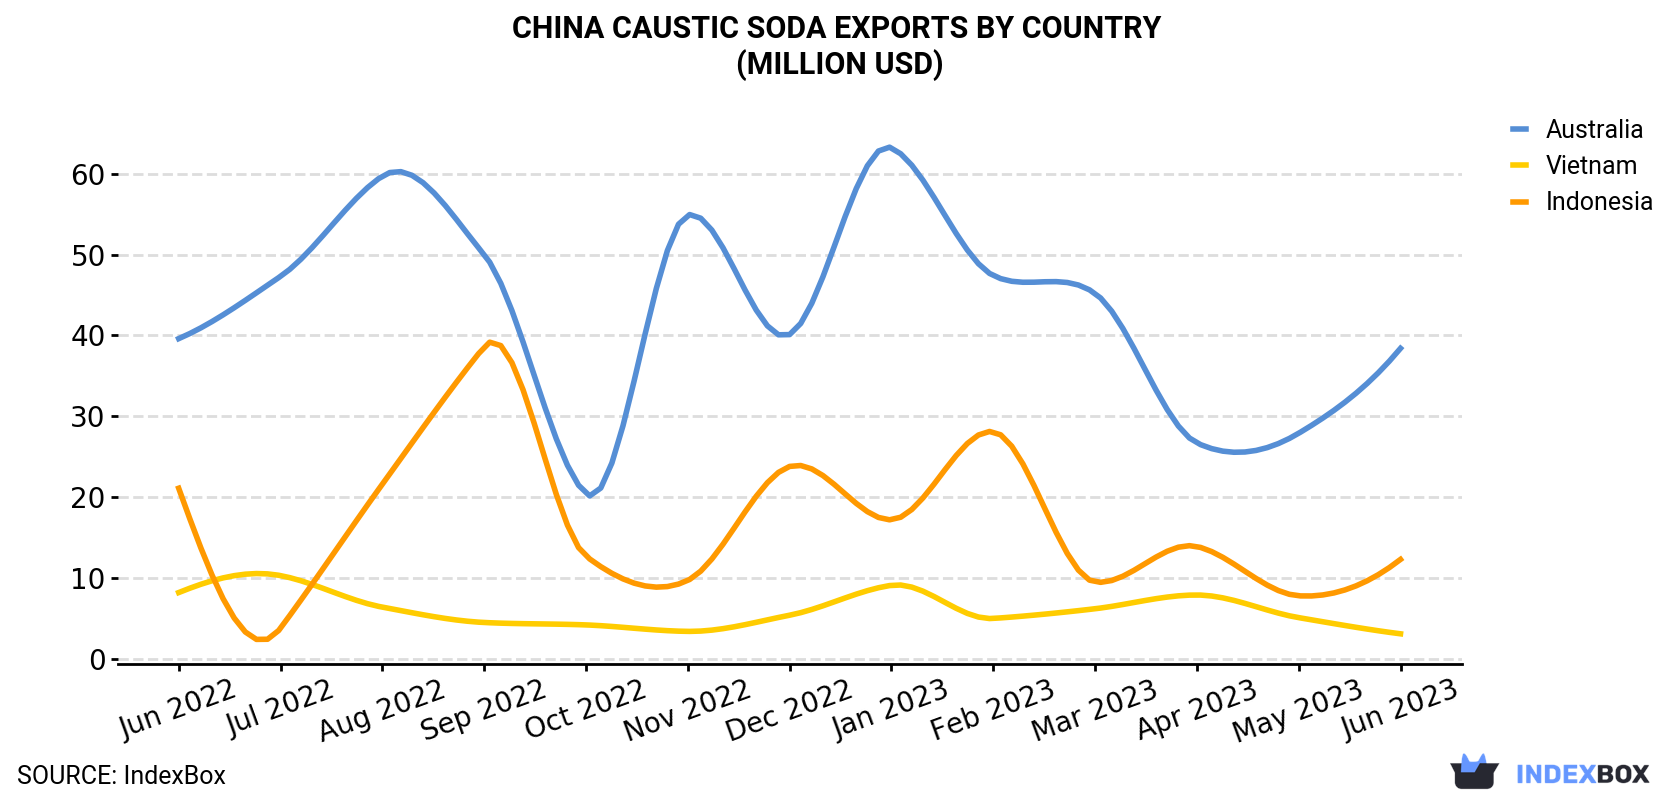 China Caustic Soda Exports By Country (Million USD)